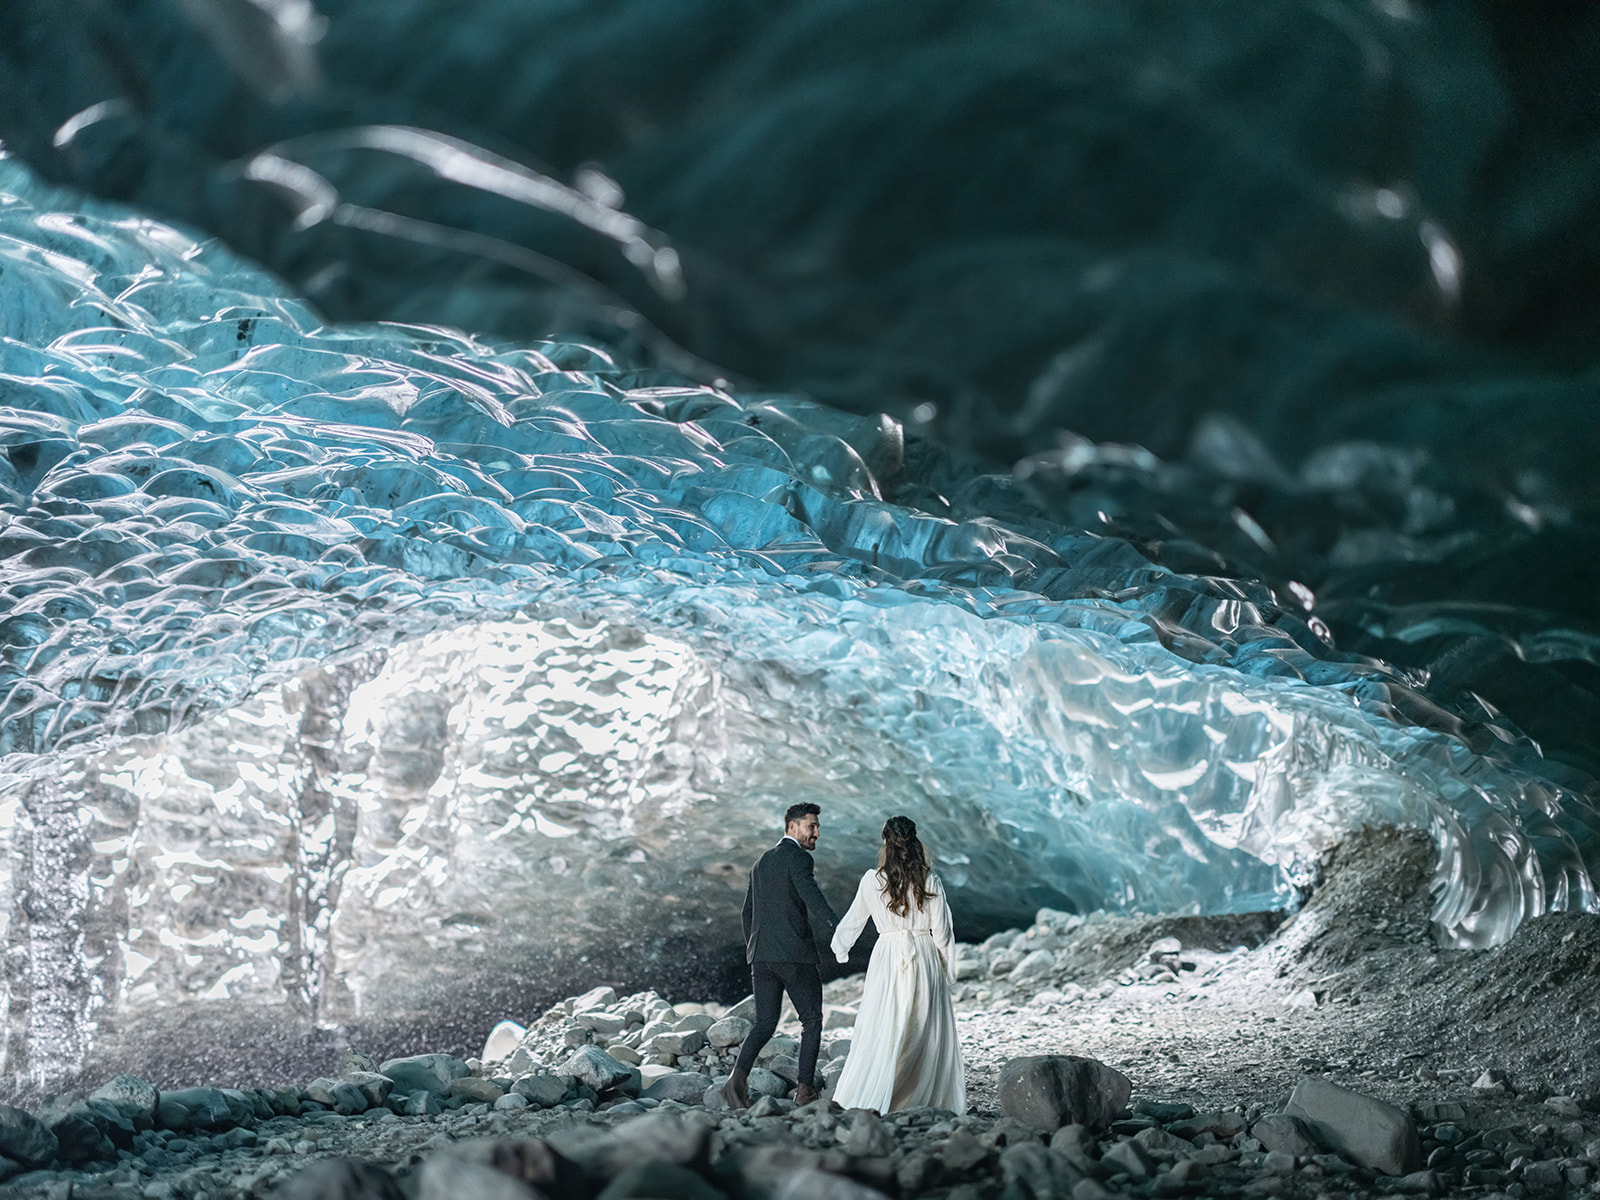 Bride and groom exploring and Ice Cave during their Iceland Elopement.